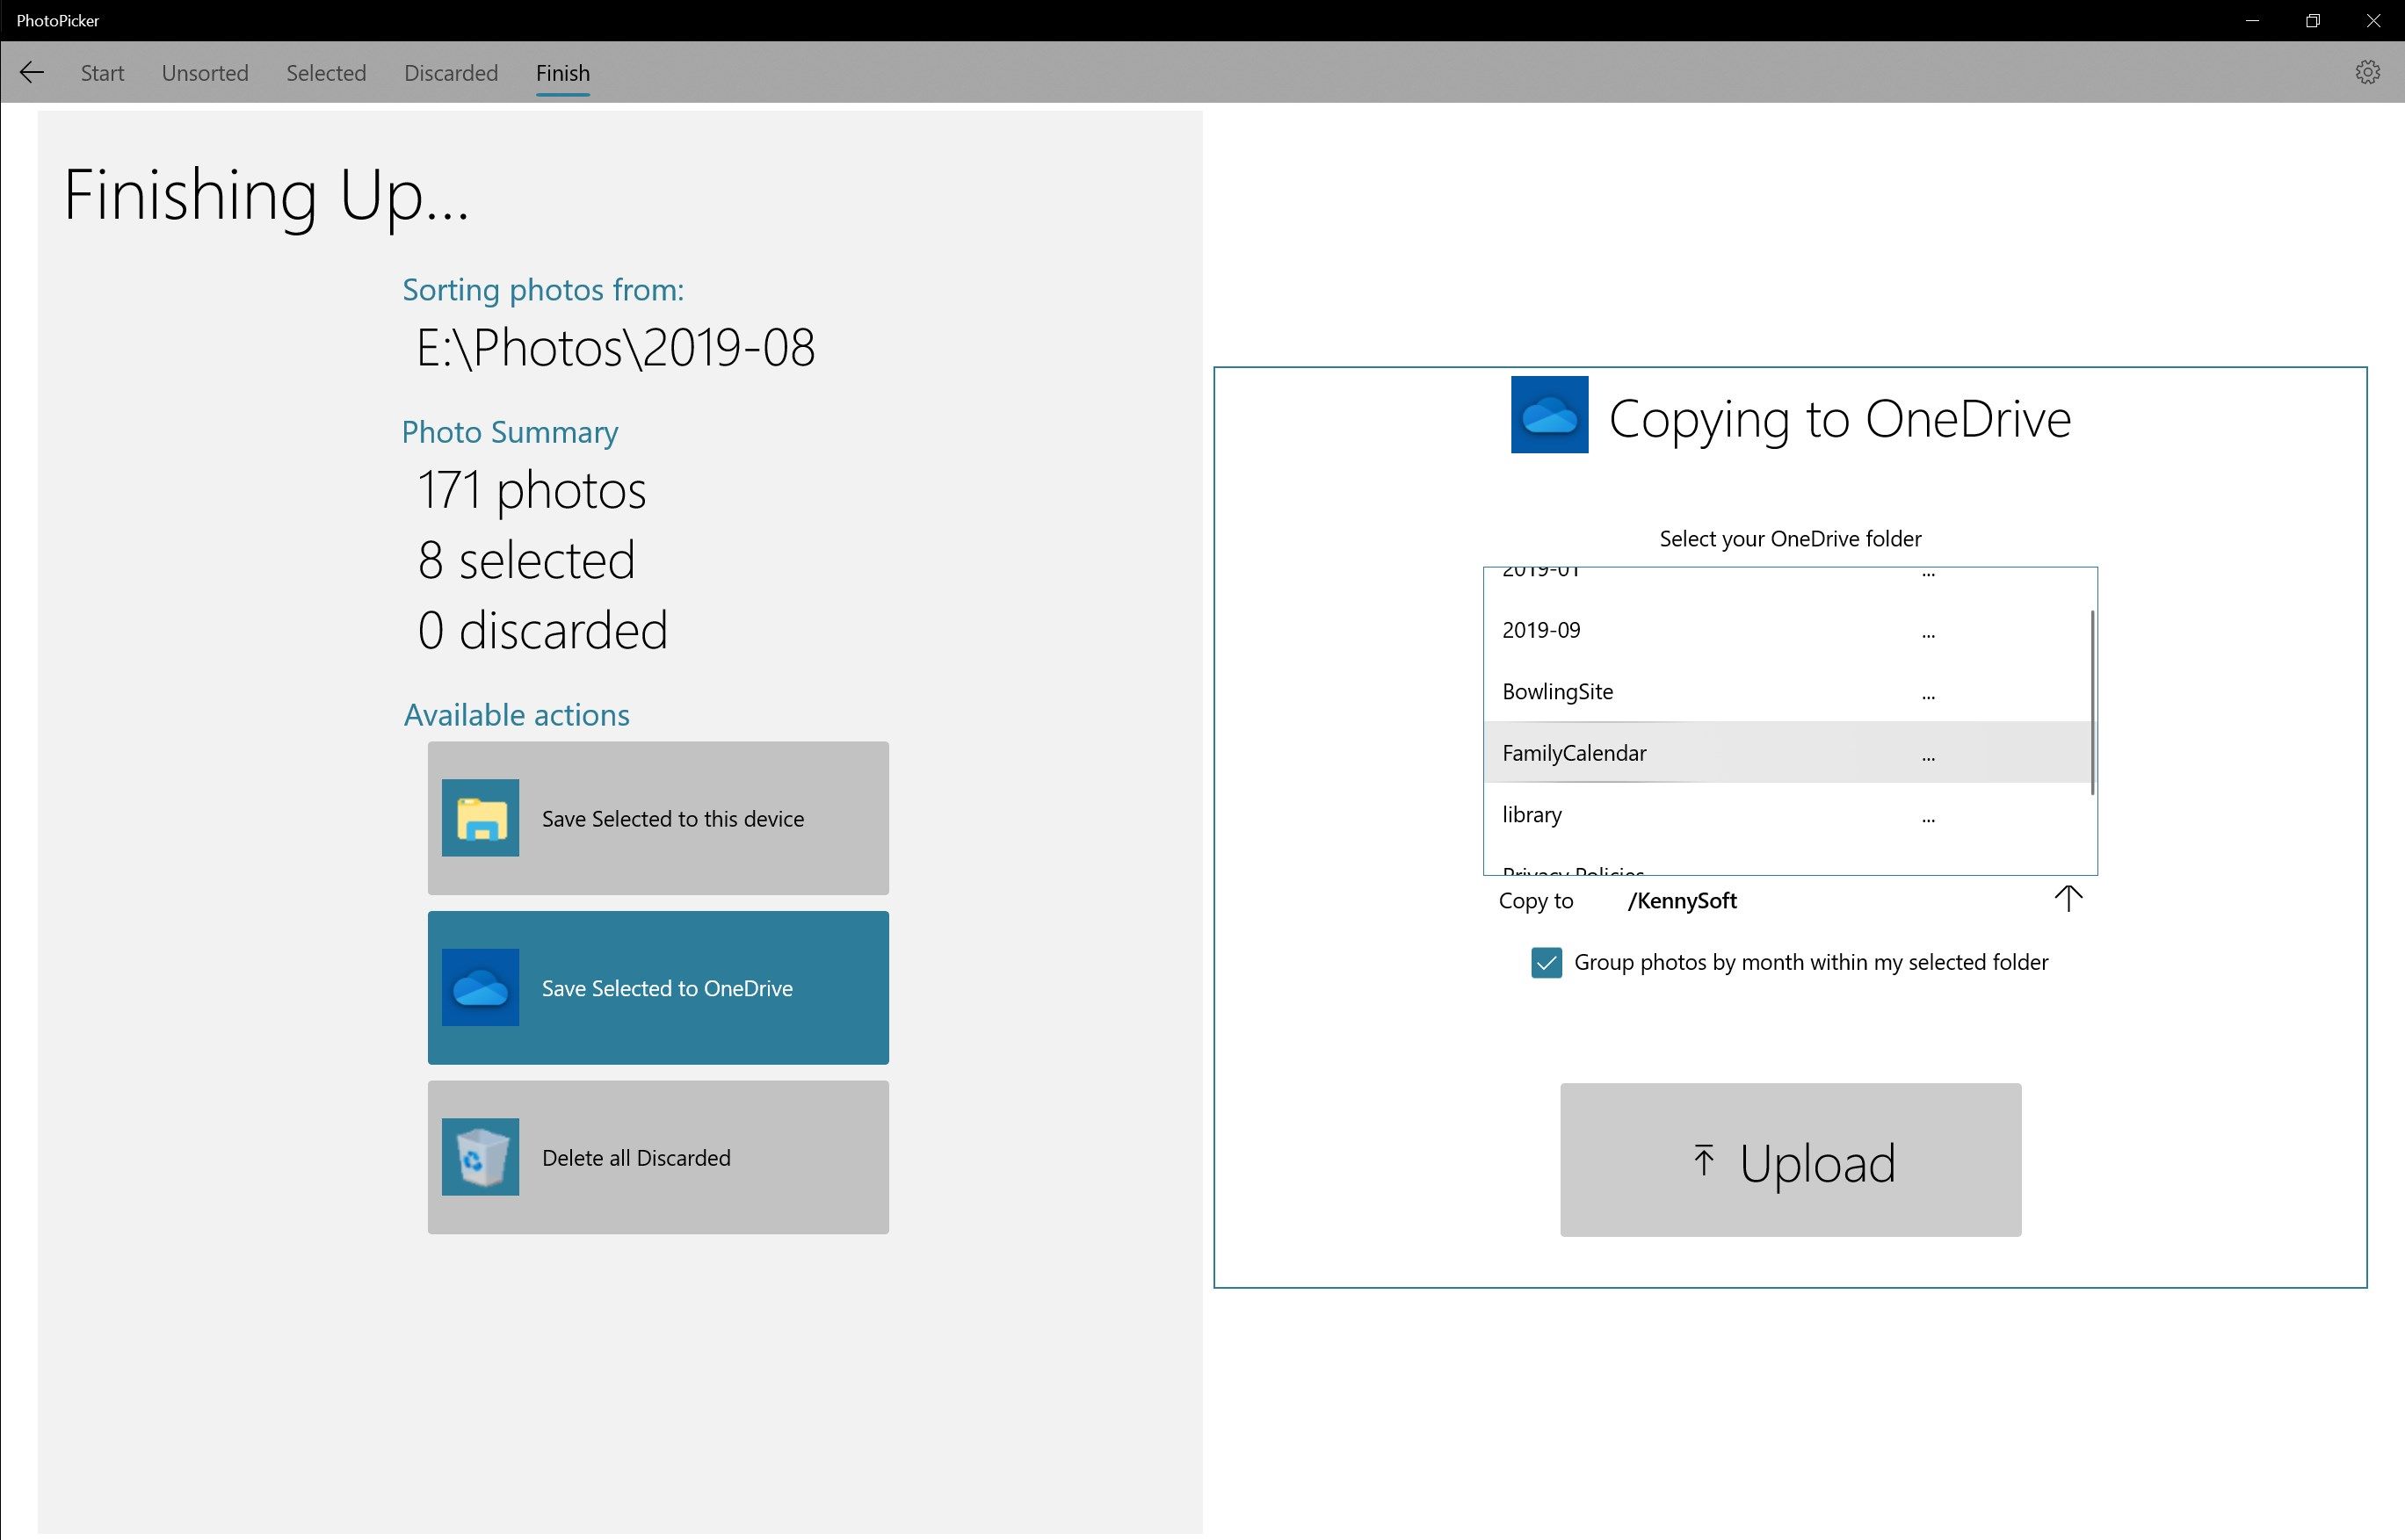 Copying to OneDrive: You can also copy your selected photos directly to your OneDrive.
Both dark and light themes are supported